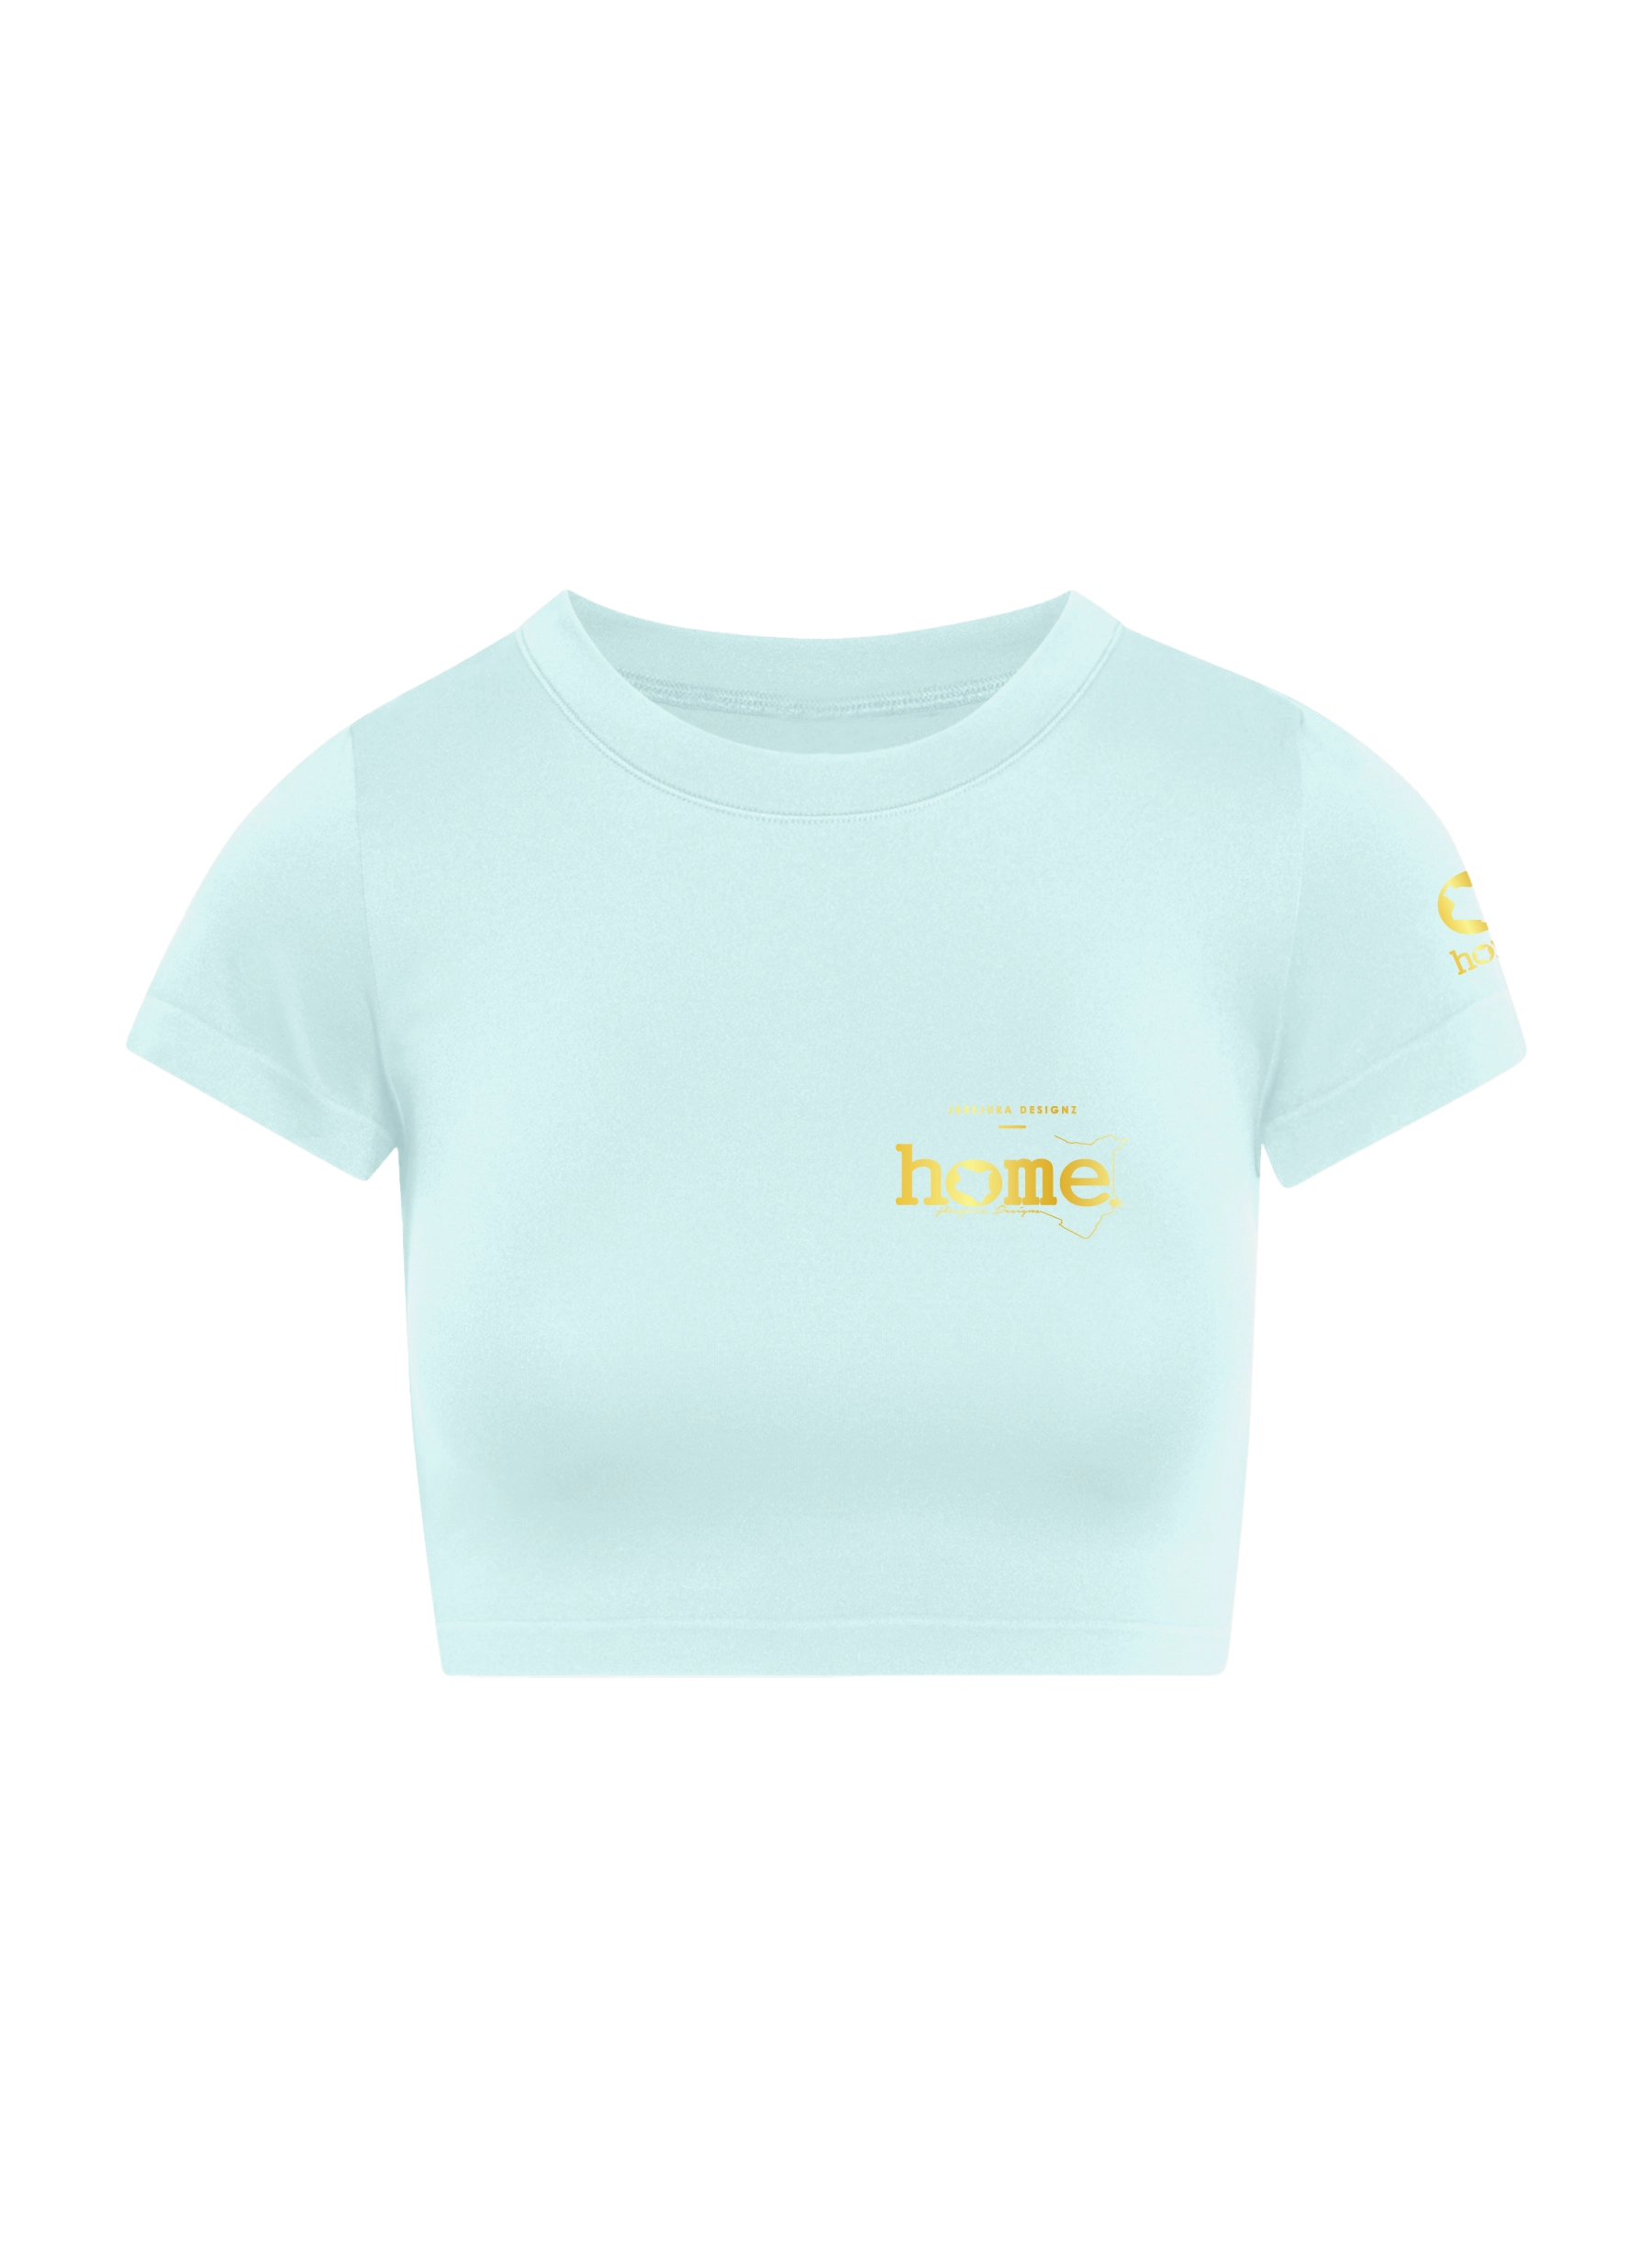 home_254 SHORT SLEEVED MISTY BLUE CROPPED ARIA TEE WITH A GOLD 3D WORDS PRINT – COTTON PLUS FABRIC